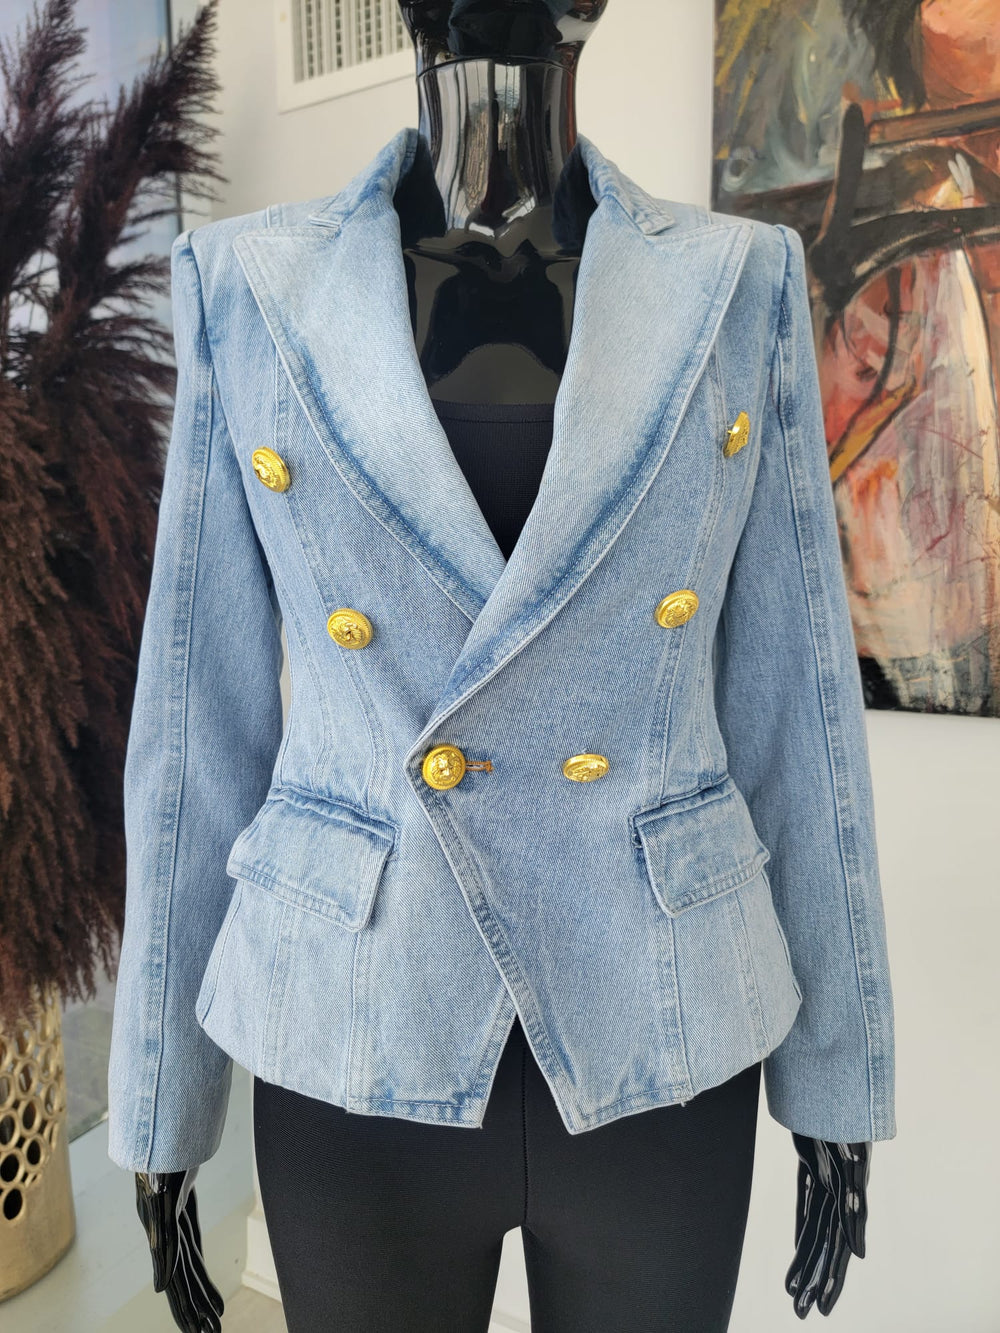 Fitted Jeans Blazer